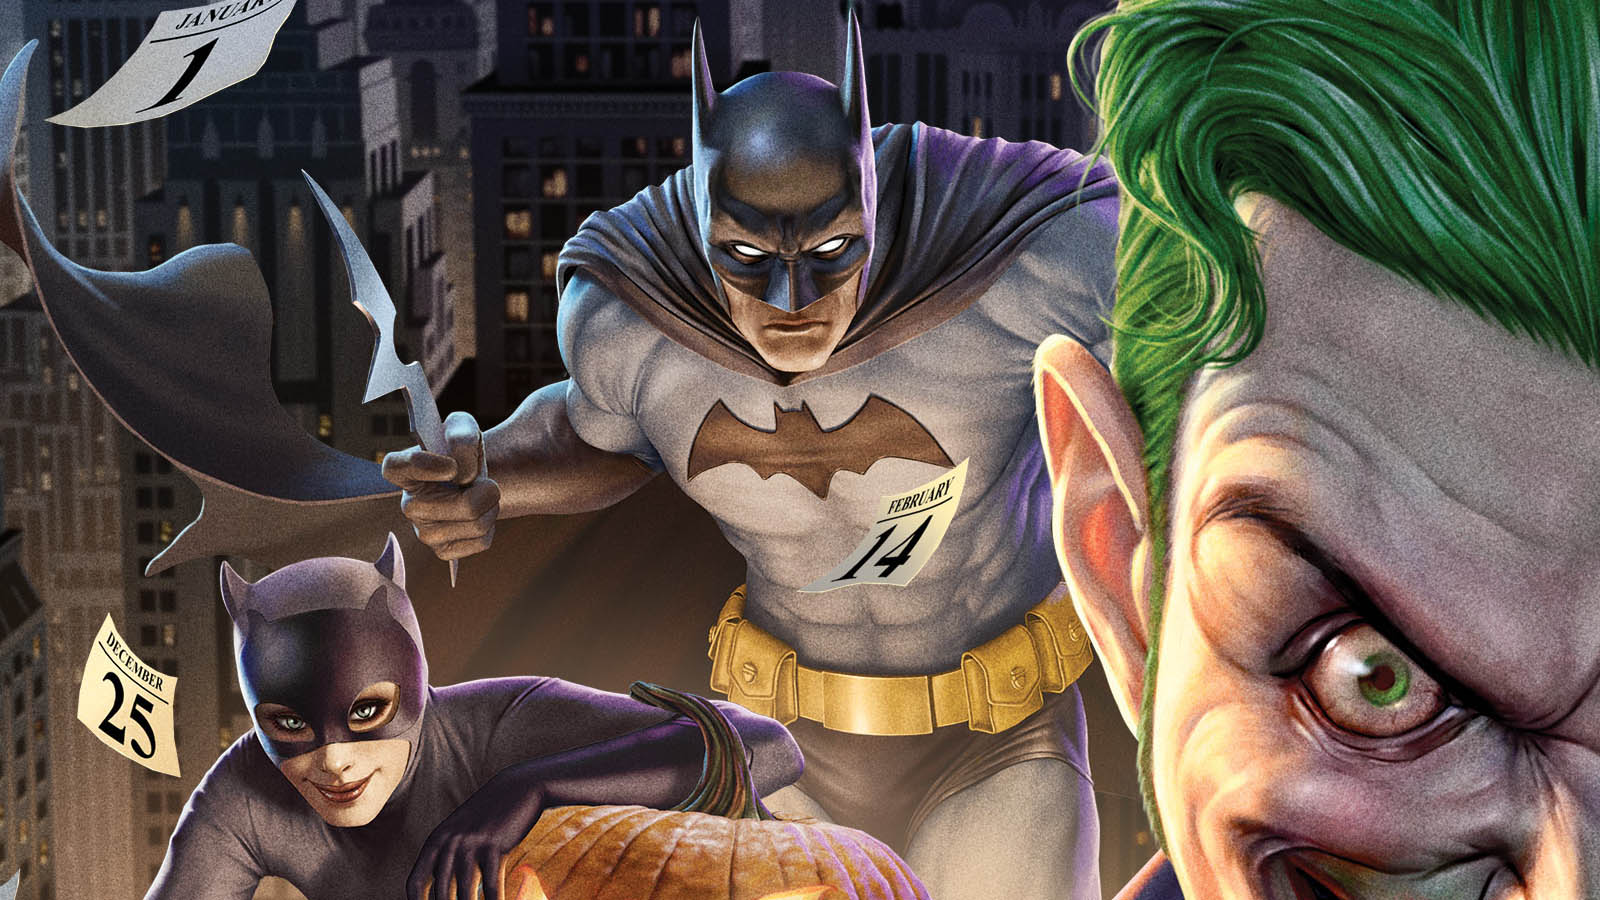 Batman: The Long Halloween release date and details announced